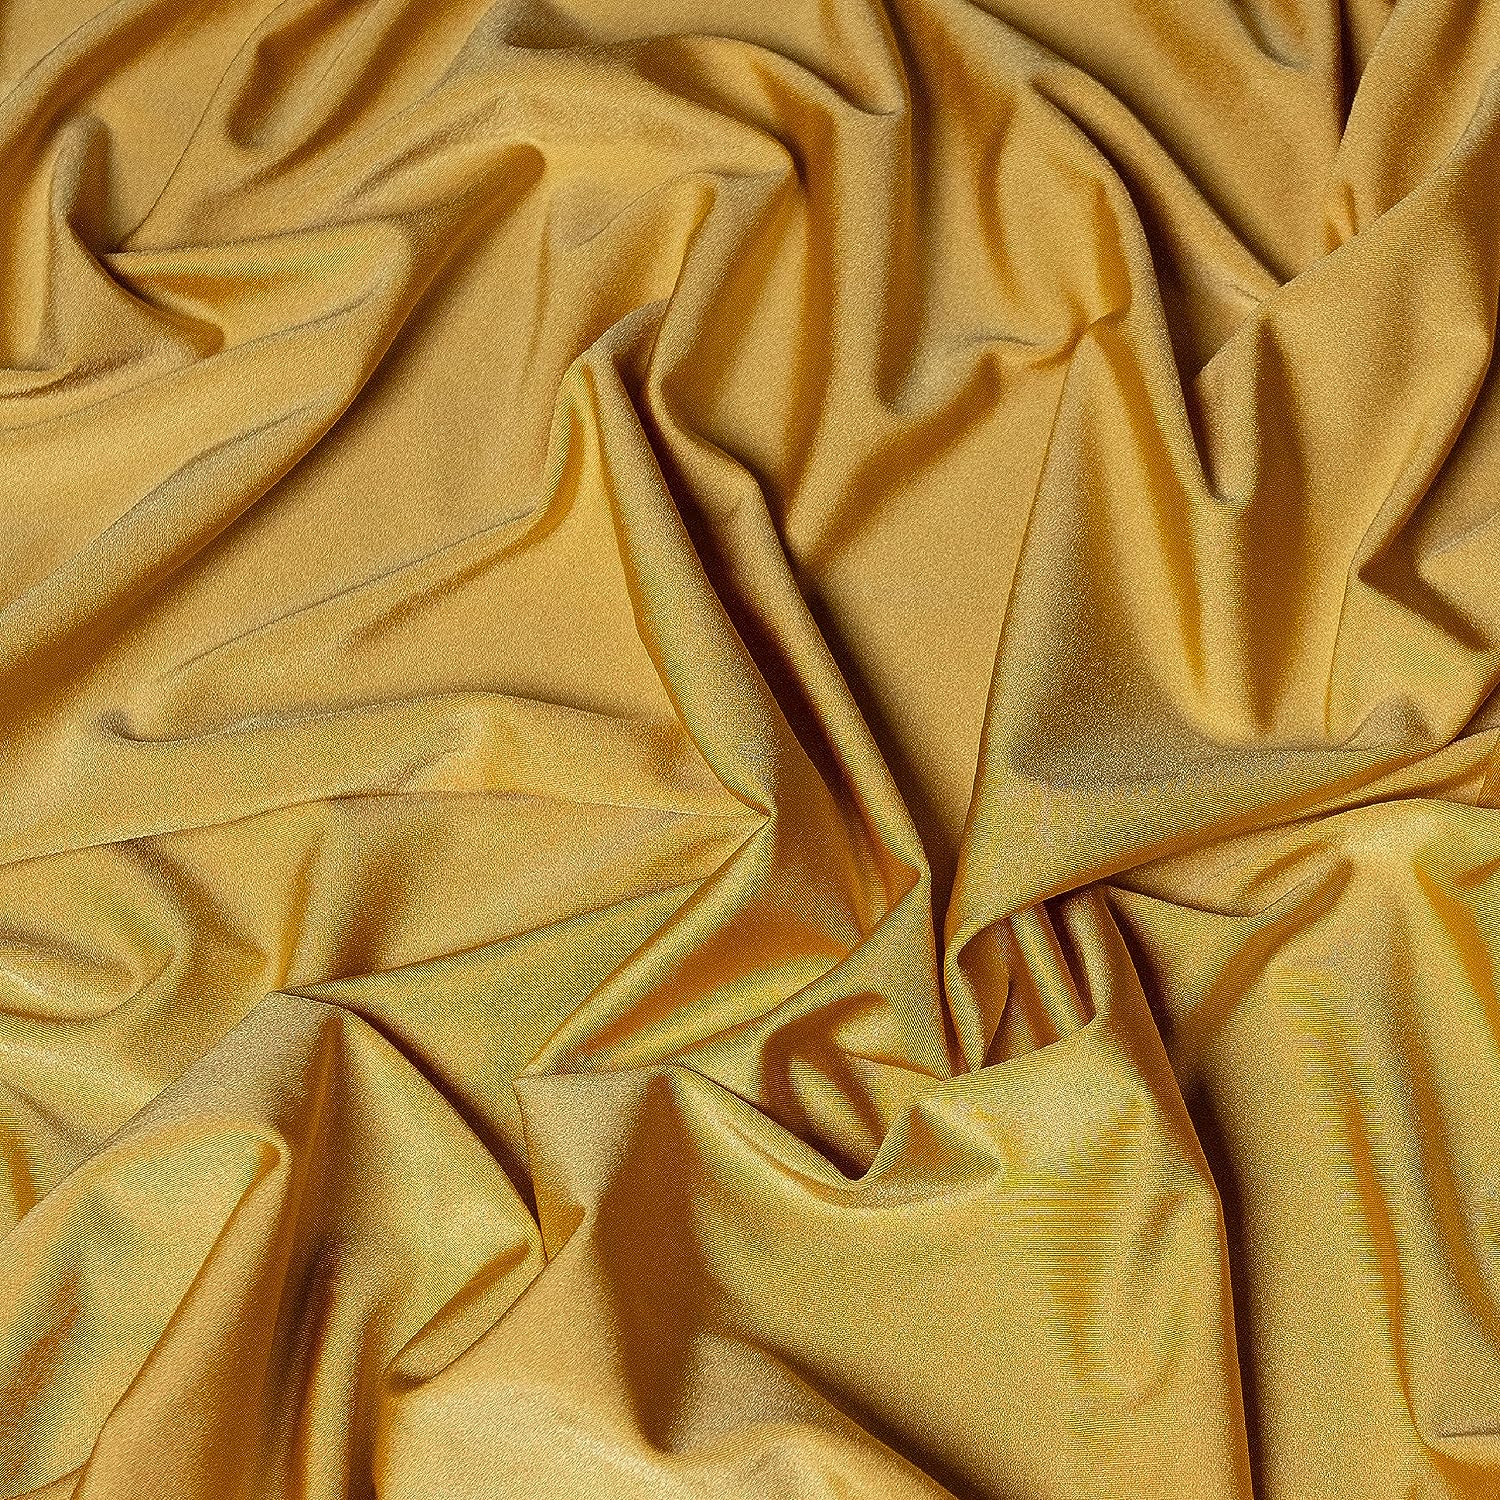 Gold Luxury Nylon Spandex Fabric By The YardICE FABRICSICE FABRICSBy The Yard (60" Width)Gold Luxury Nylon Spandex Fabric By The Yard ICE FABRICS